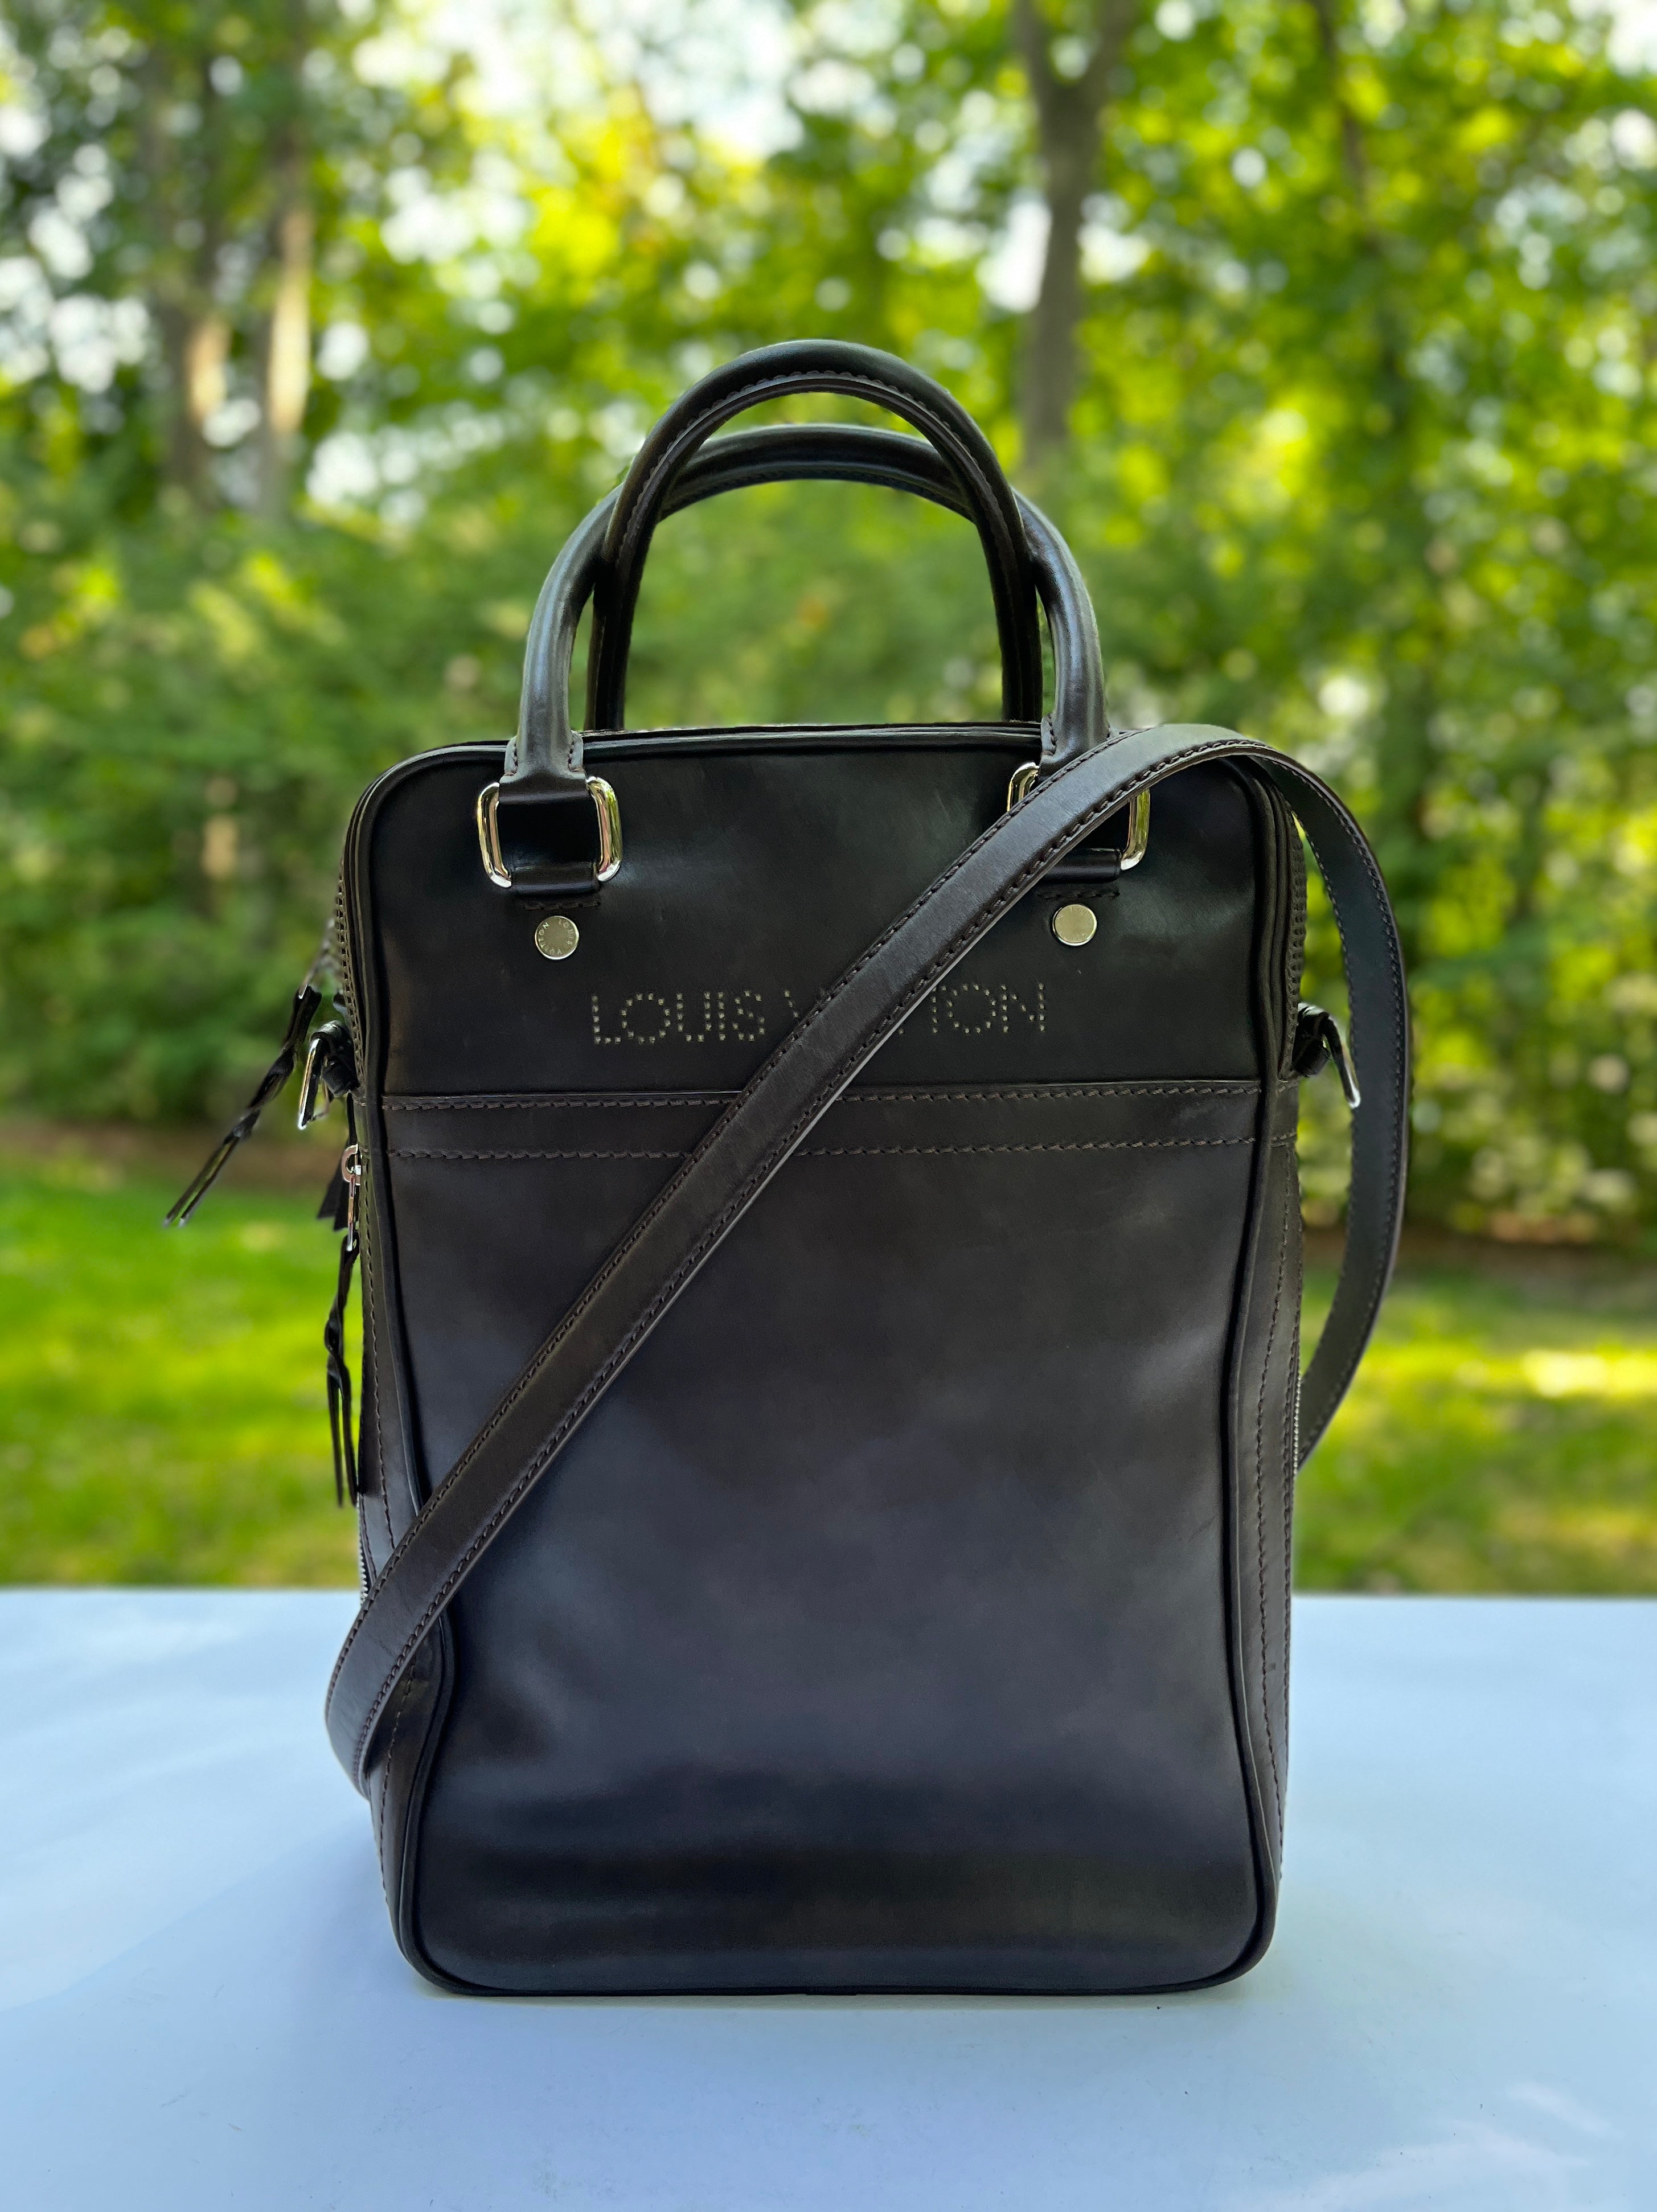 Louis Vuitton Cuir Plume and Cuir Ecume Leather Very One Handle in Noir  Satchel